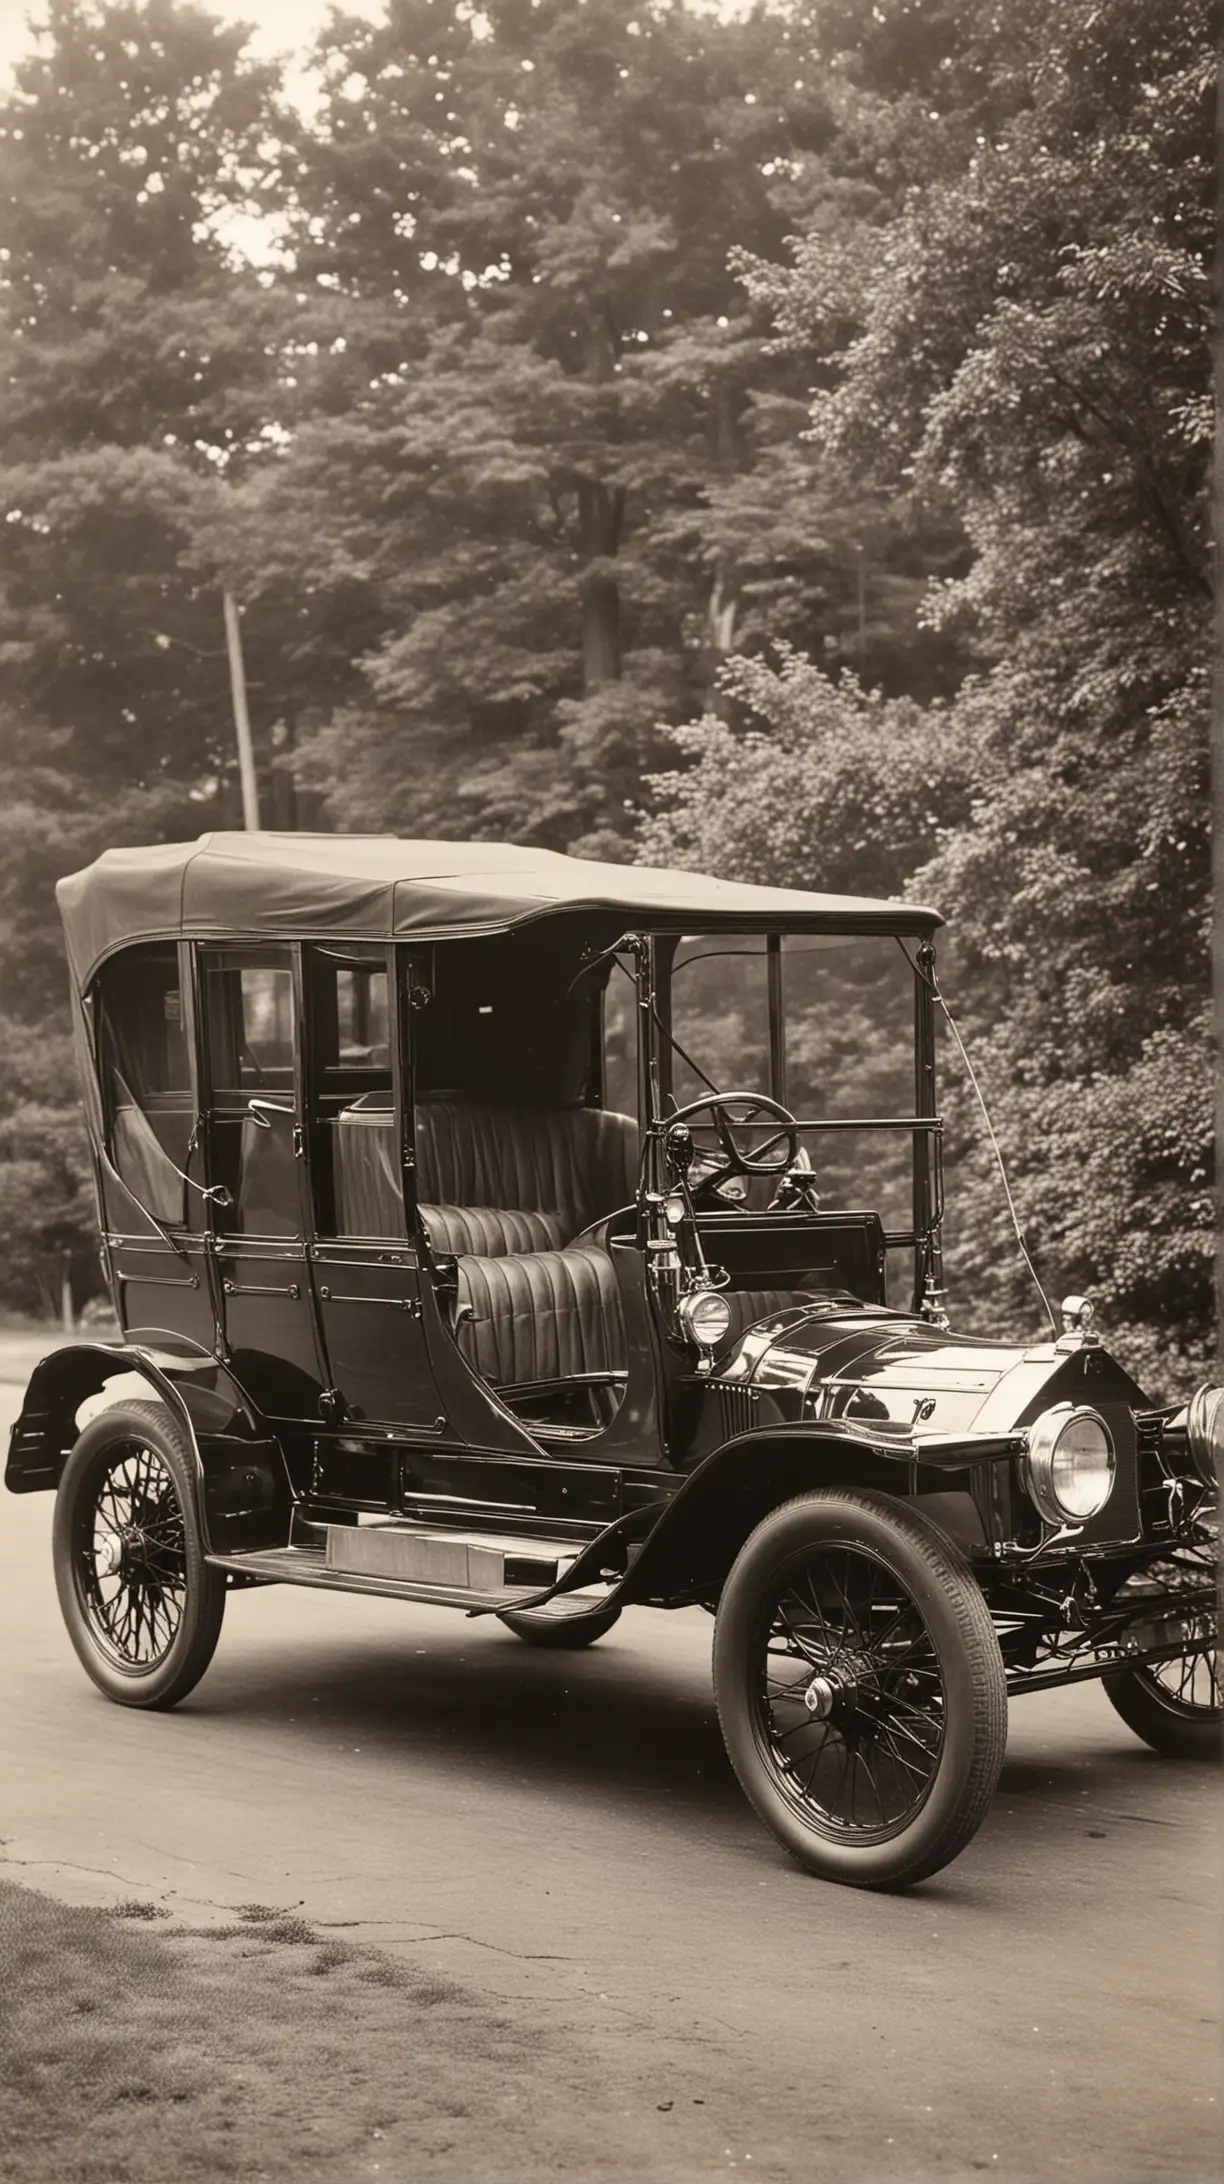 Vintage PattersonGreenfield Automobile from 1915